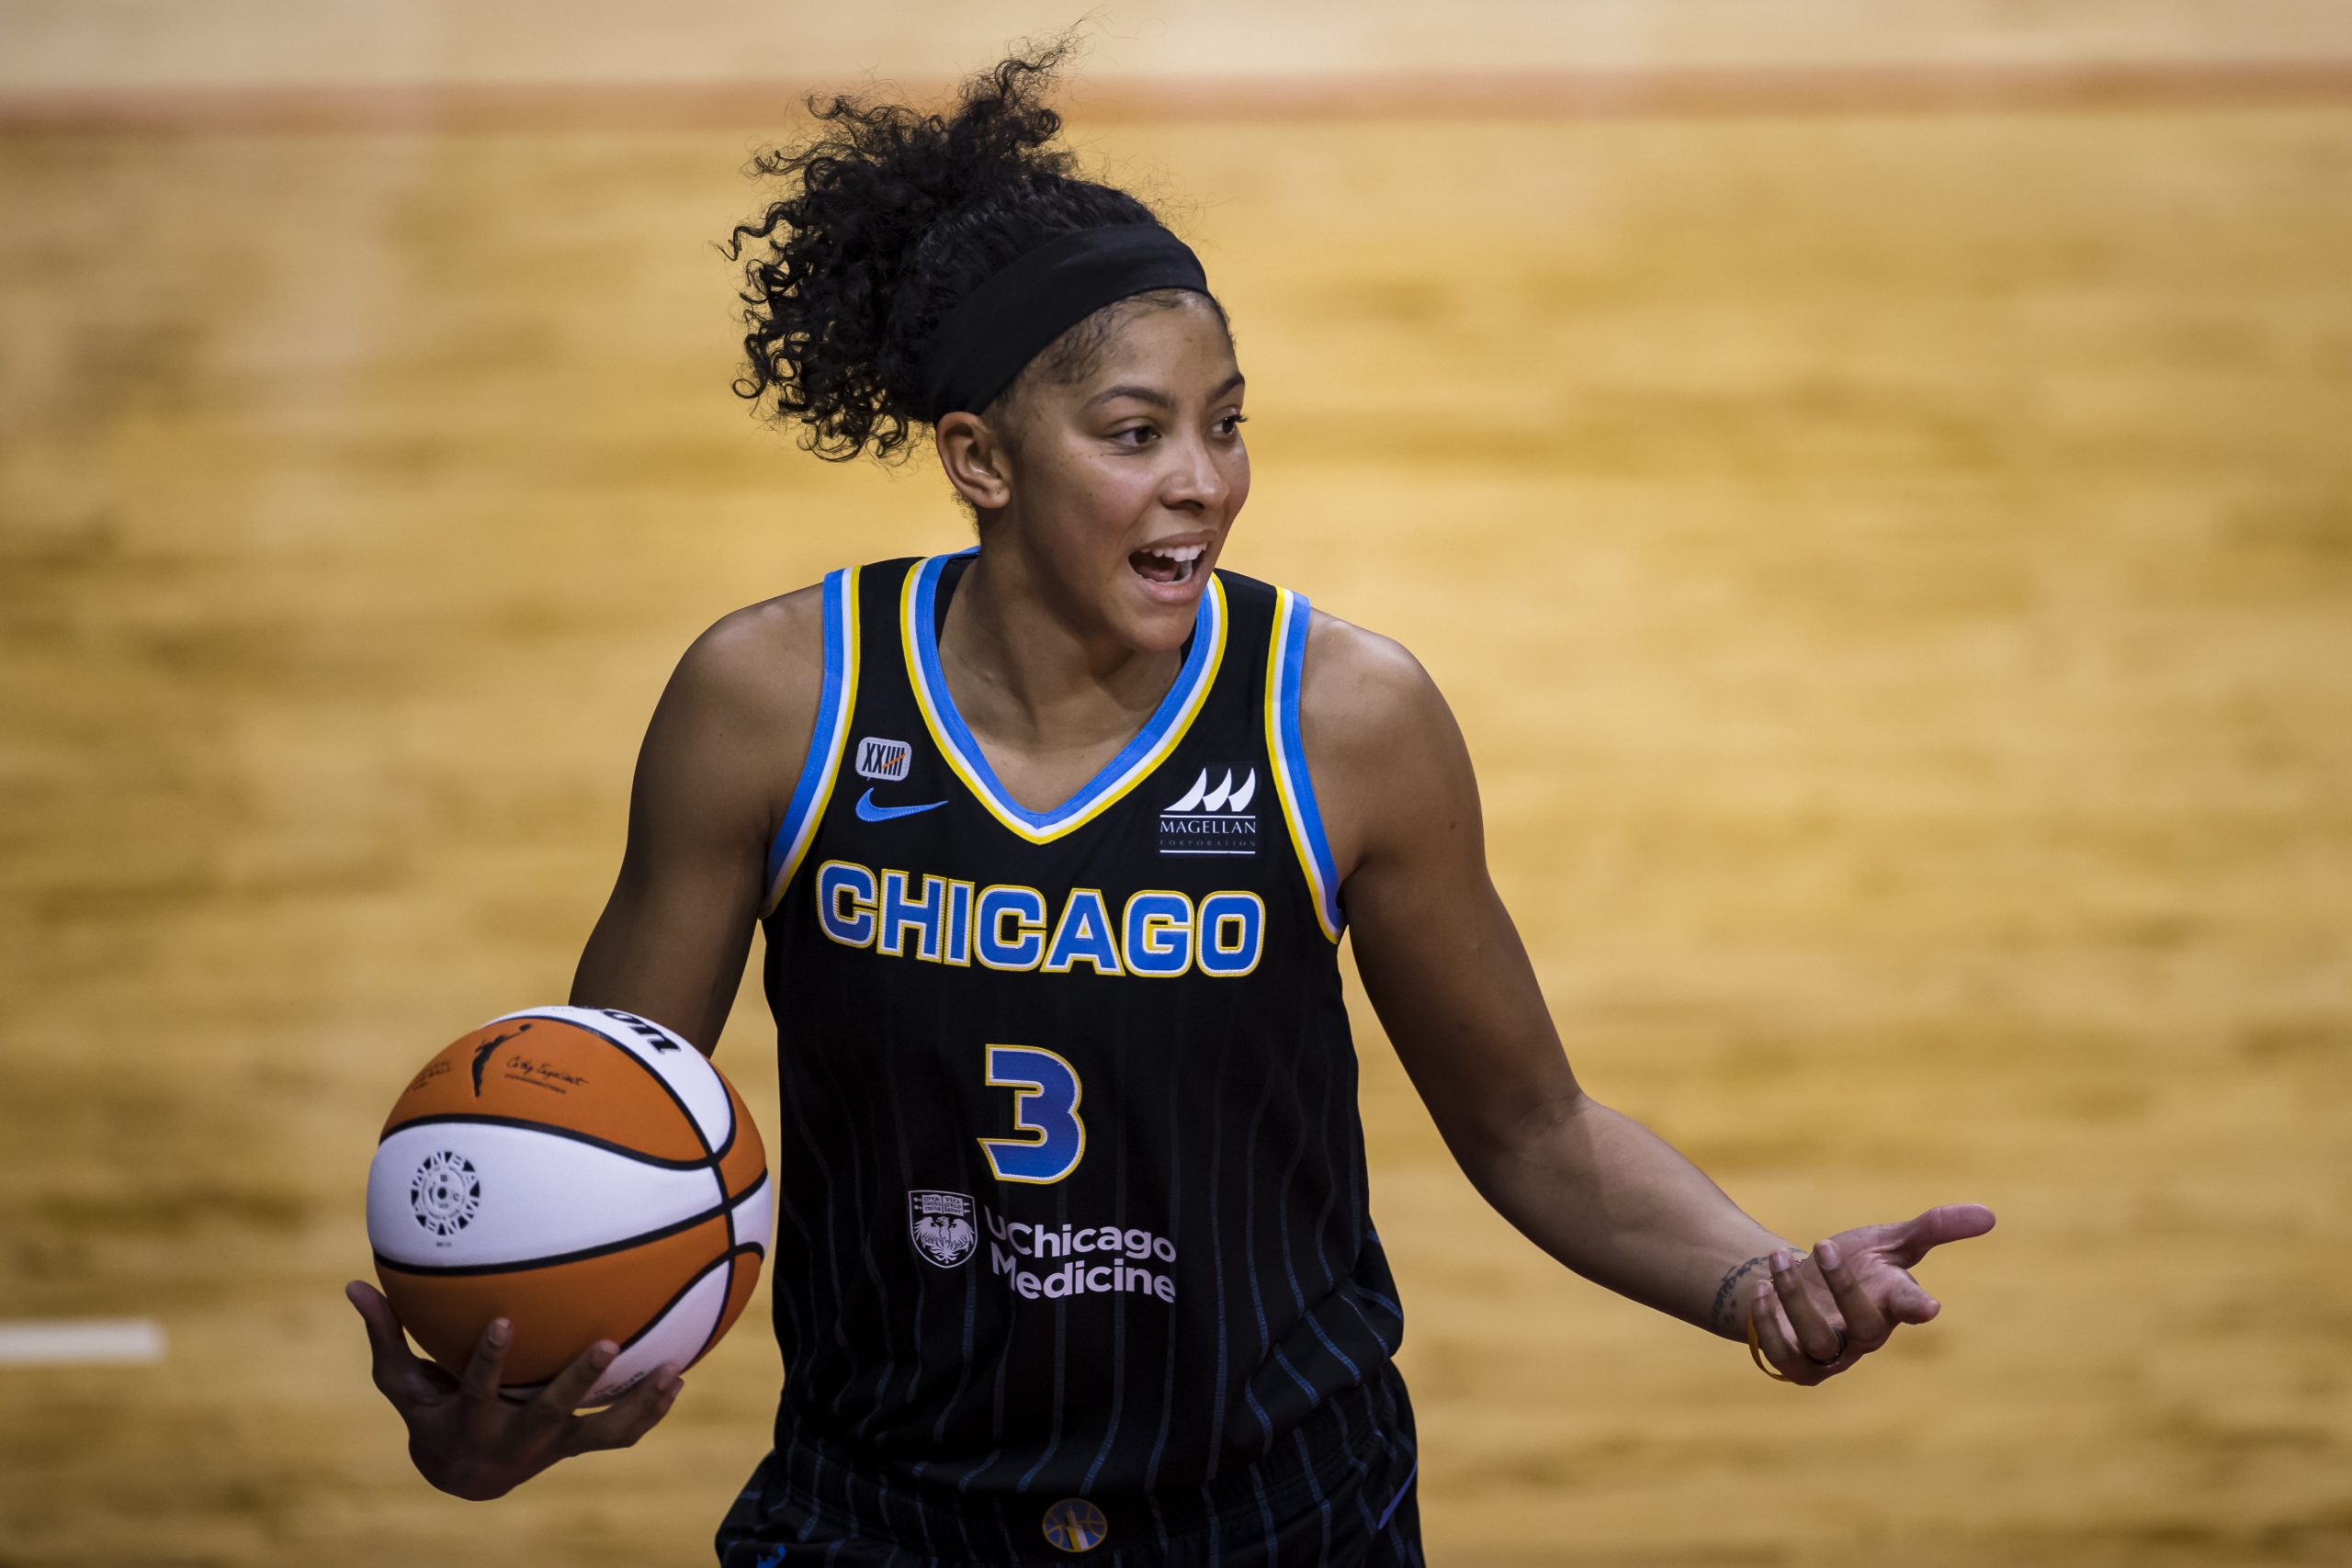 Working With Candace Parker Is Priceless, Says Ro Parrish - Landon Buford.